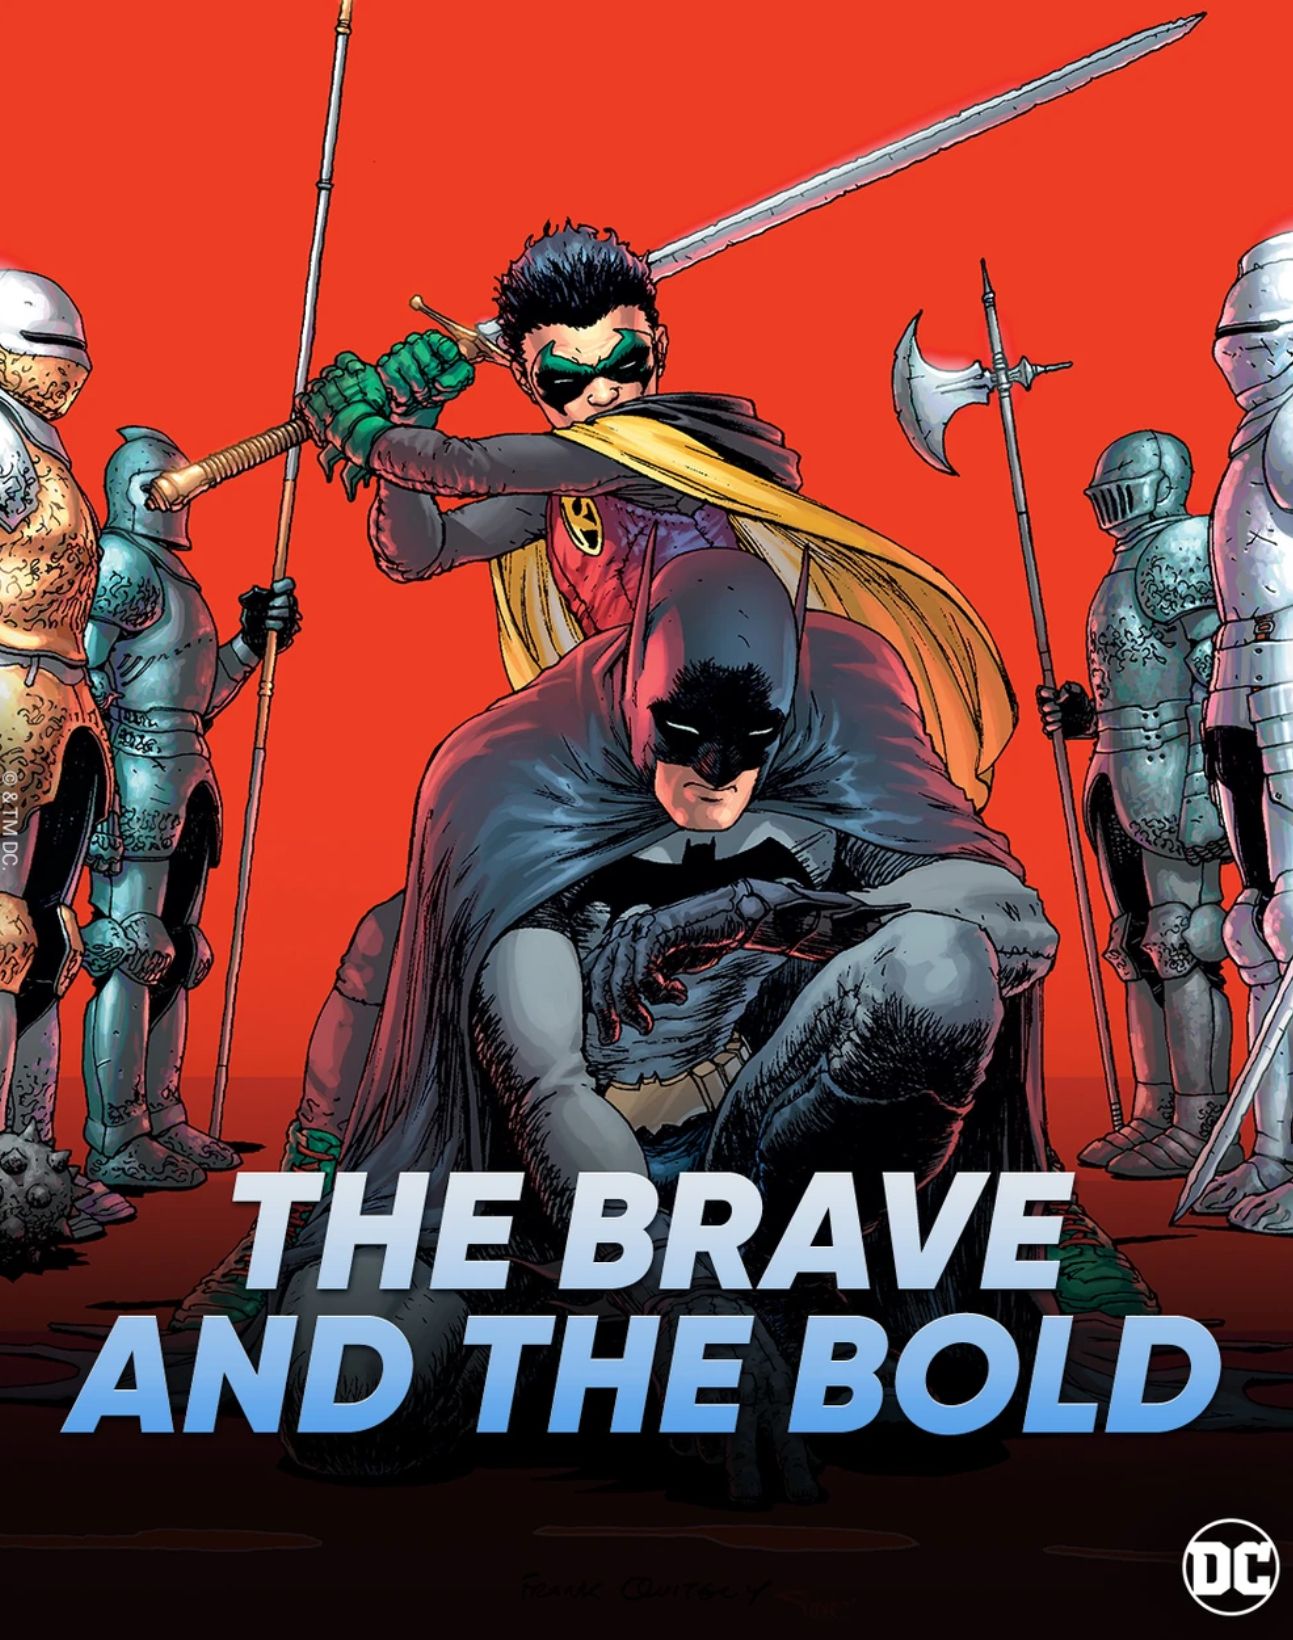 Damien Wayne Holds Sword to Batman in The Brave and the Bold